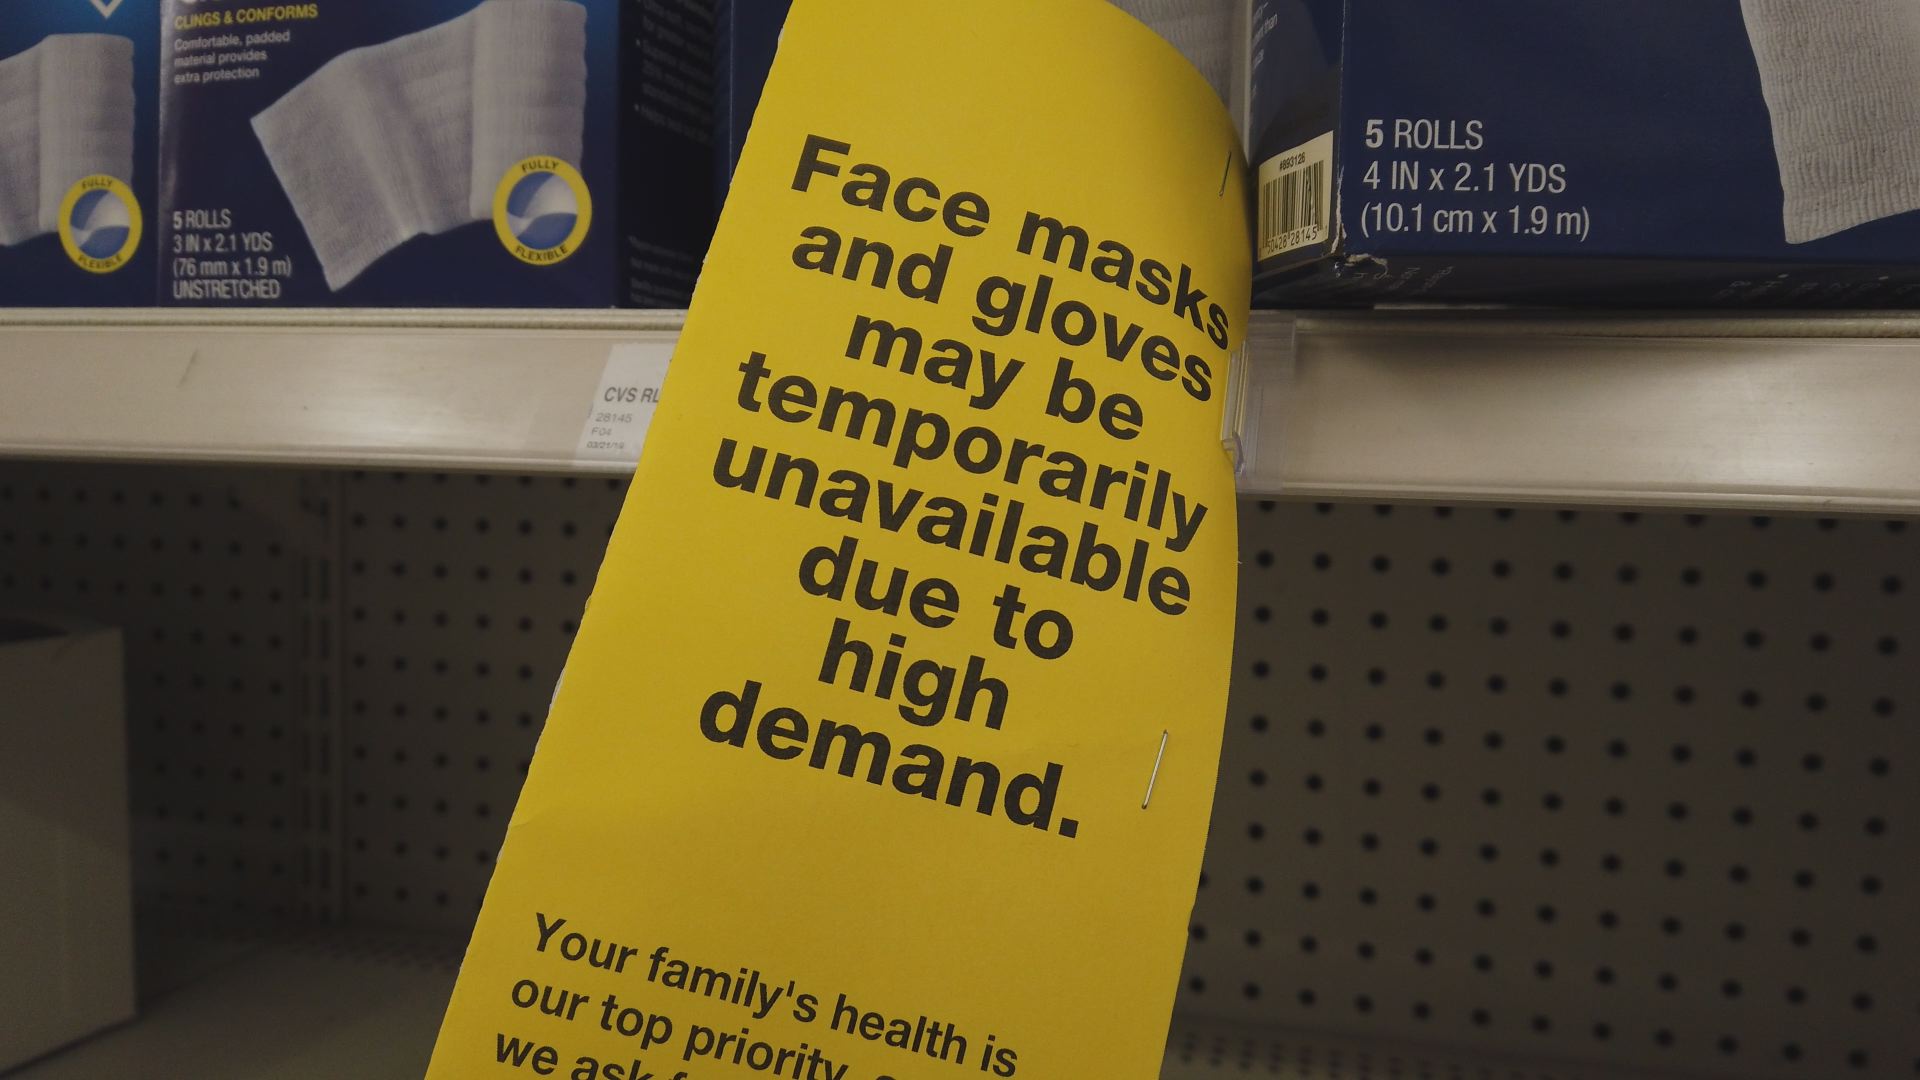 Sign saying "Face masks and gloves may be temporarily unavailable due to high demand.""